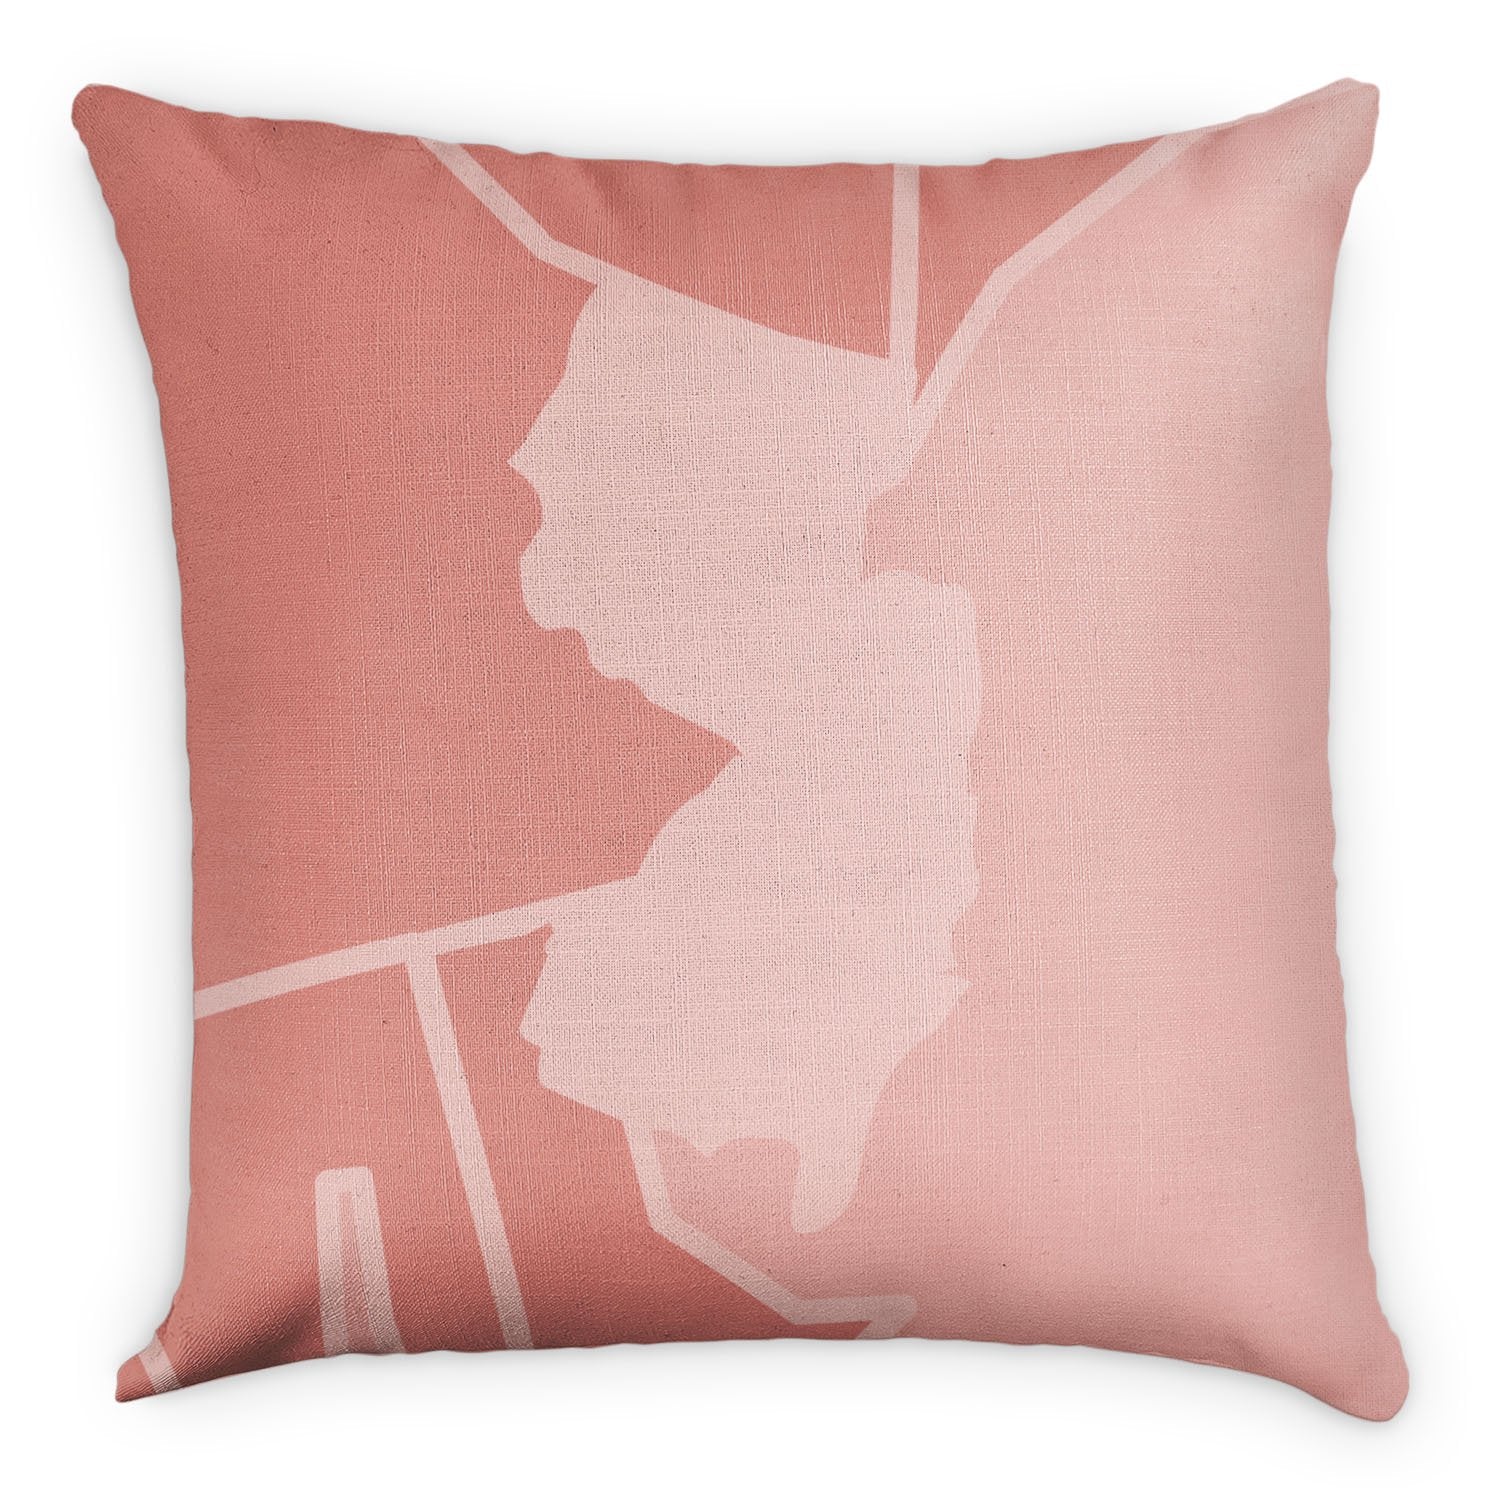 New Jersey Square Pillow - Linen -  - Knotty Tie Co.